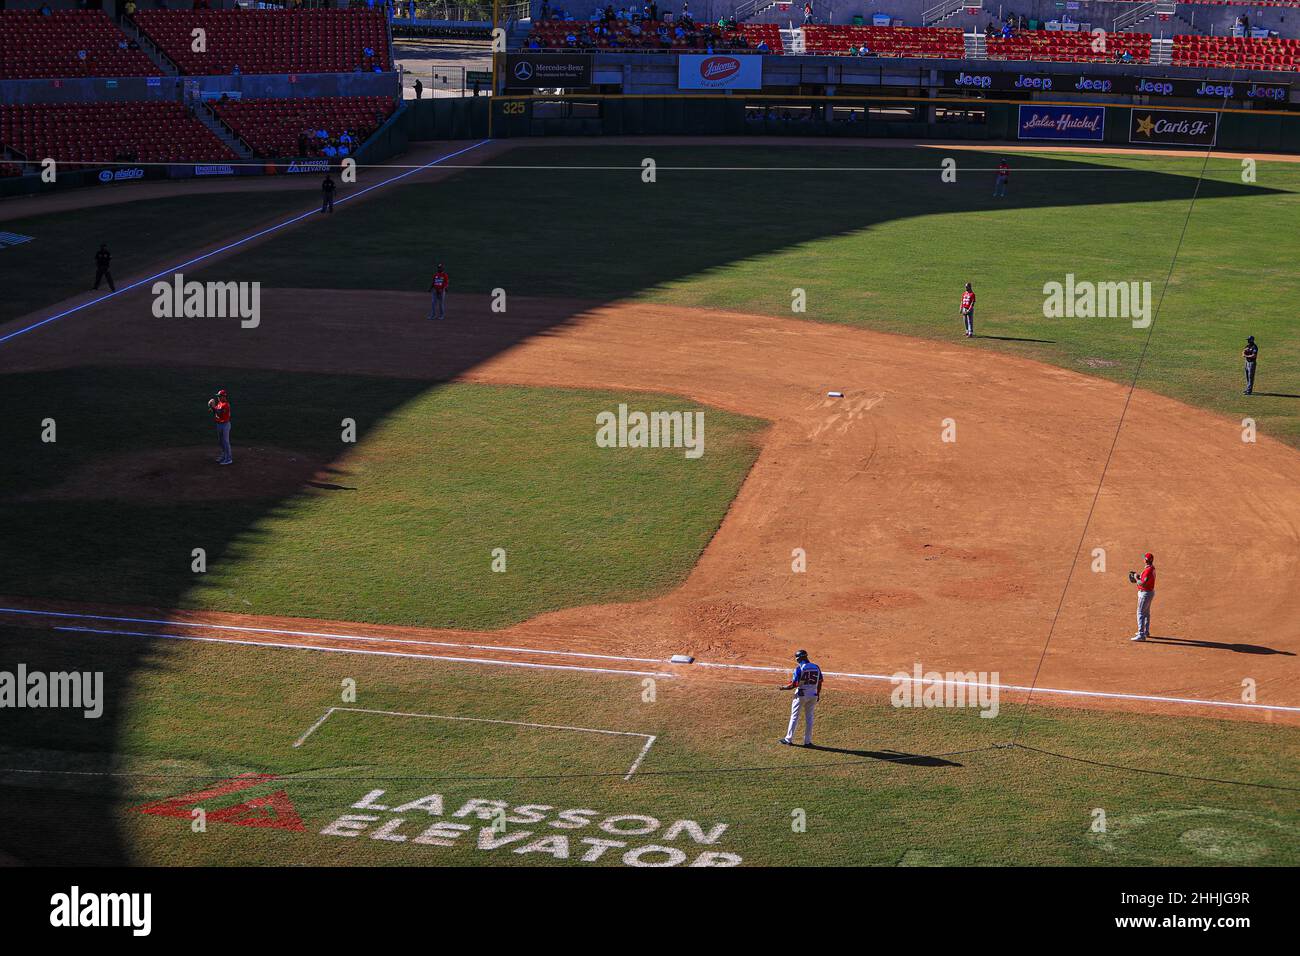 MAZATLAN, MEXICO - FEBRUARY 05:  baseball field diamond with light and shadow at sunset in a general view  Teodoro Mariscal of the Stadium  diamanete del campo de besbol con luz y sombra al atardecer en una vista general del Estadio Teodoro Mariscal   , during a match between Dominican Republic and Panama as part of Serie del Caribe 2021 at Teodoro Mariscal Stadium on February 5, 2021 in Mazatlan, Mexico. (Photo by Luis Gutierrez/ Norte Photo) Stock Photo